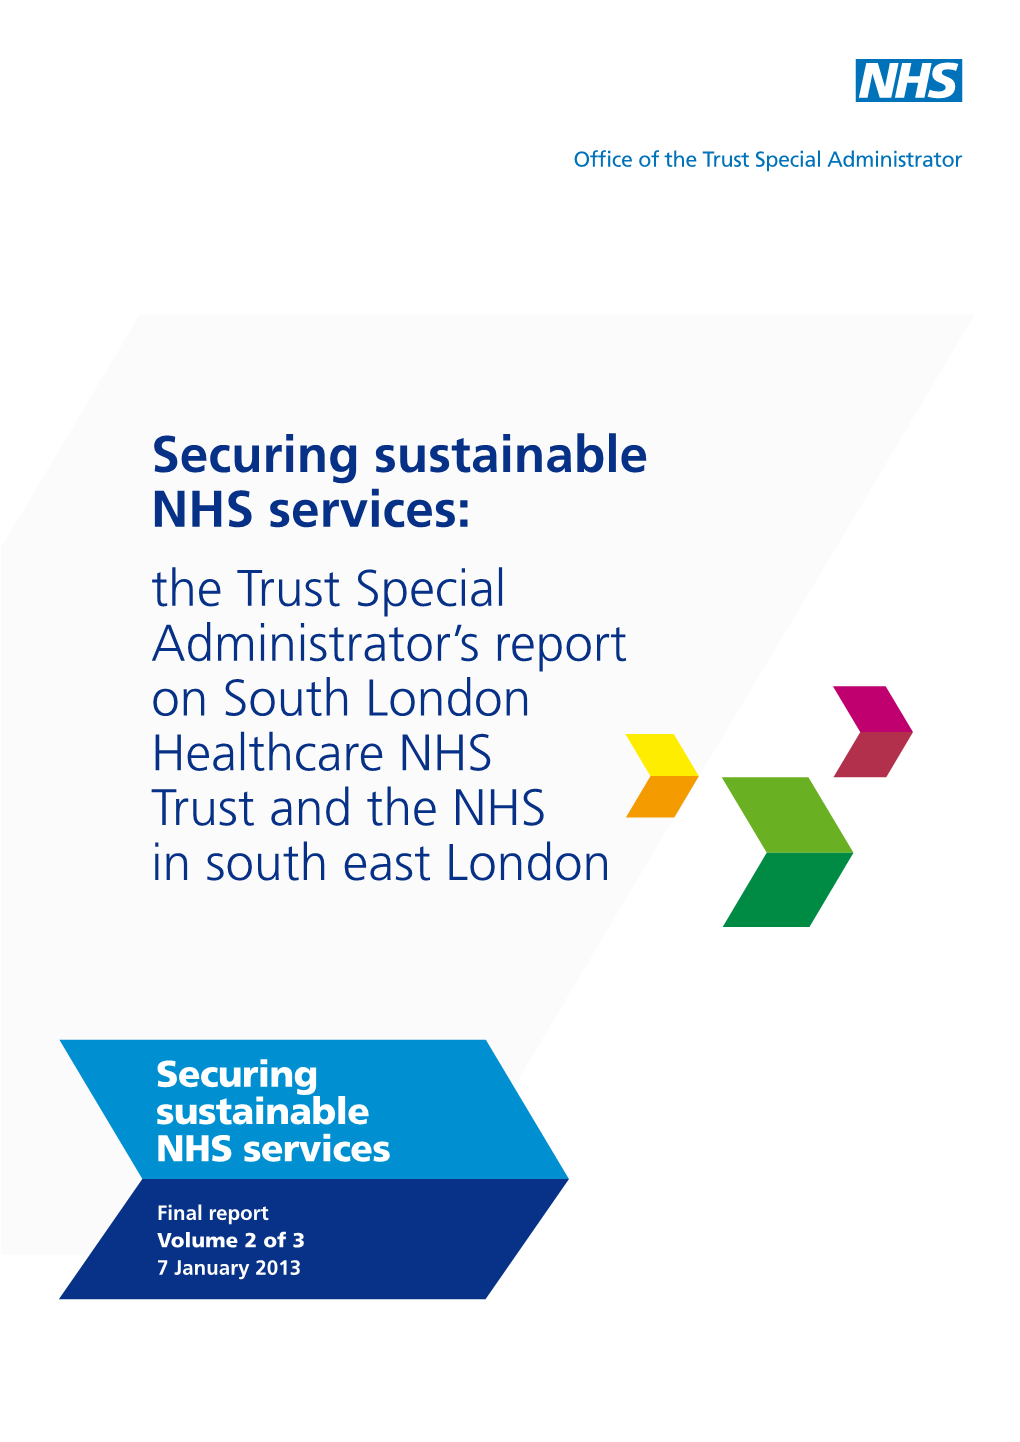 The Trust Special Administrator's Report on South London Healthcare NHS Trust And